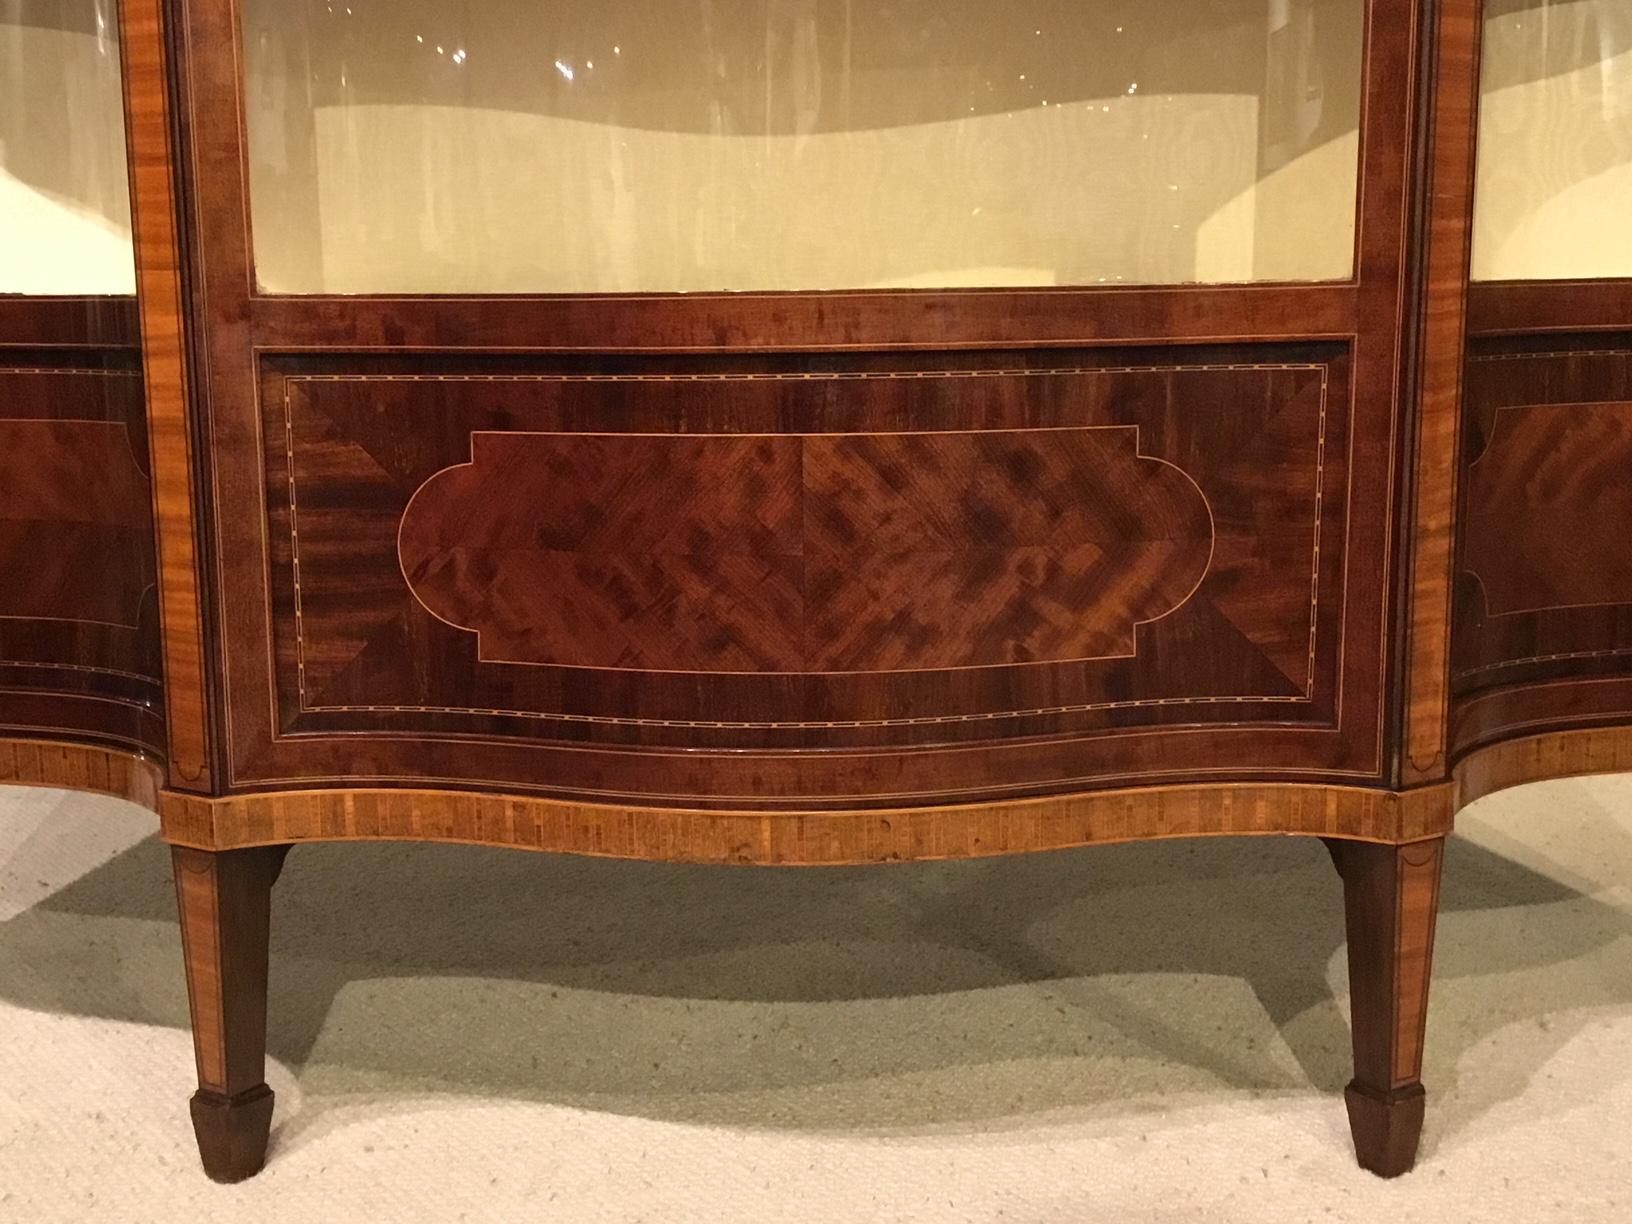 A fine quality mahogany inlaid Edwardian Period serpentine display cabinet by Maple & Co. Of serpentine outline throughout, having a moulded cornice above a flamed mahogany and mahogany inlaid frieze and chequer band inlaid border. The central